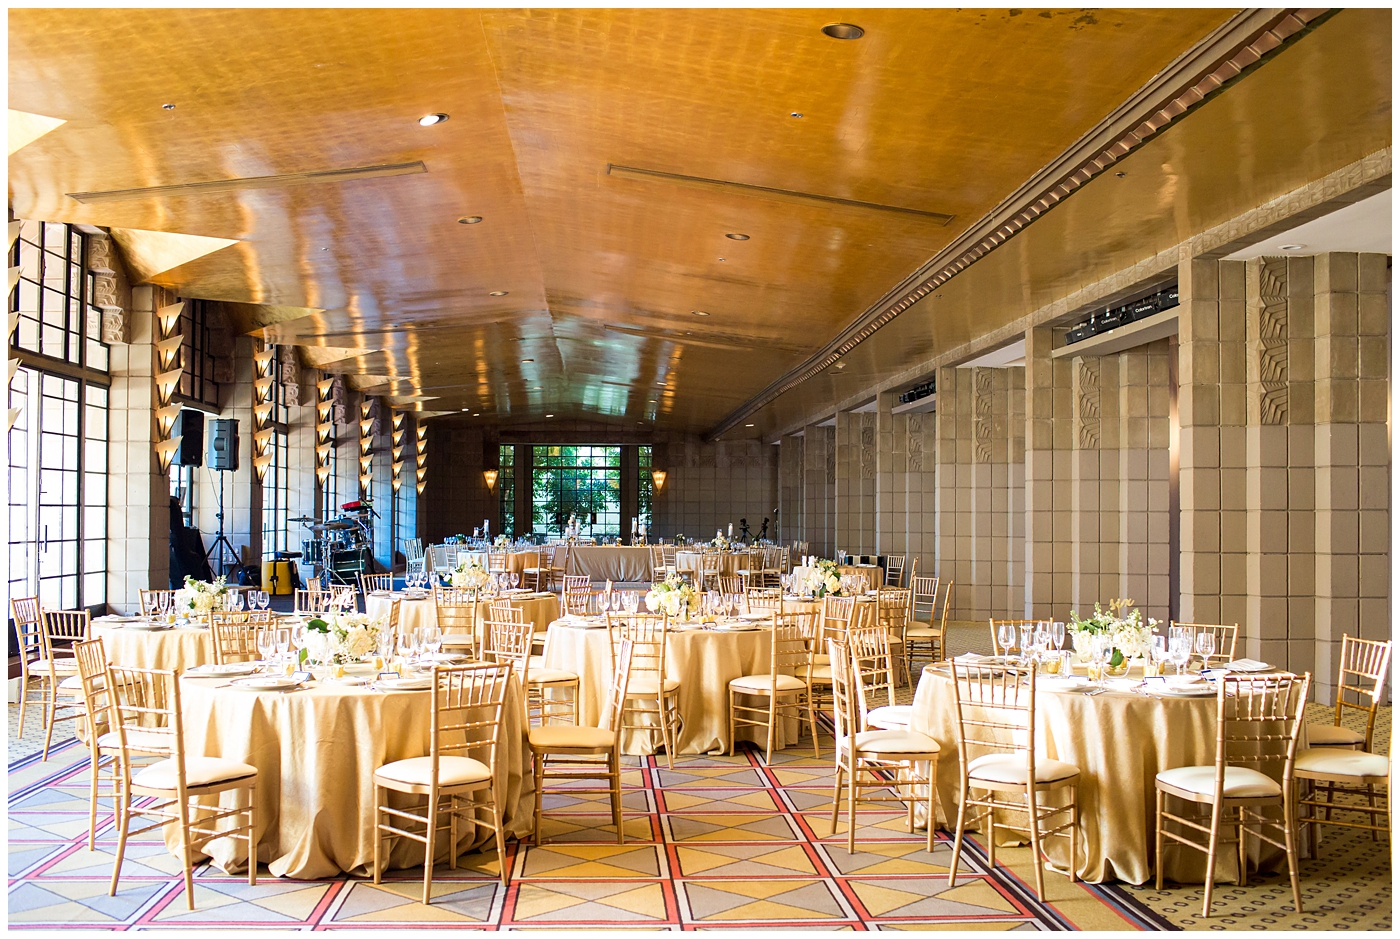 Arizona Biltmore gold ballroom wedding reception details with gold chairs and tablecloths with white roses and greenery centerpieces in gold vases with glitter royal blue placecards